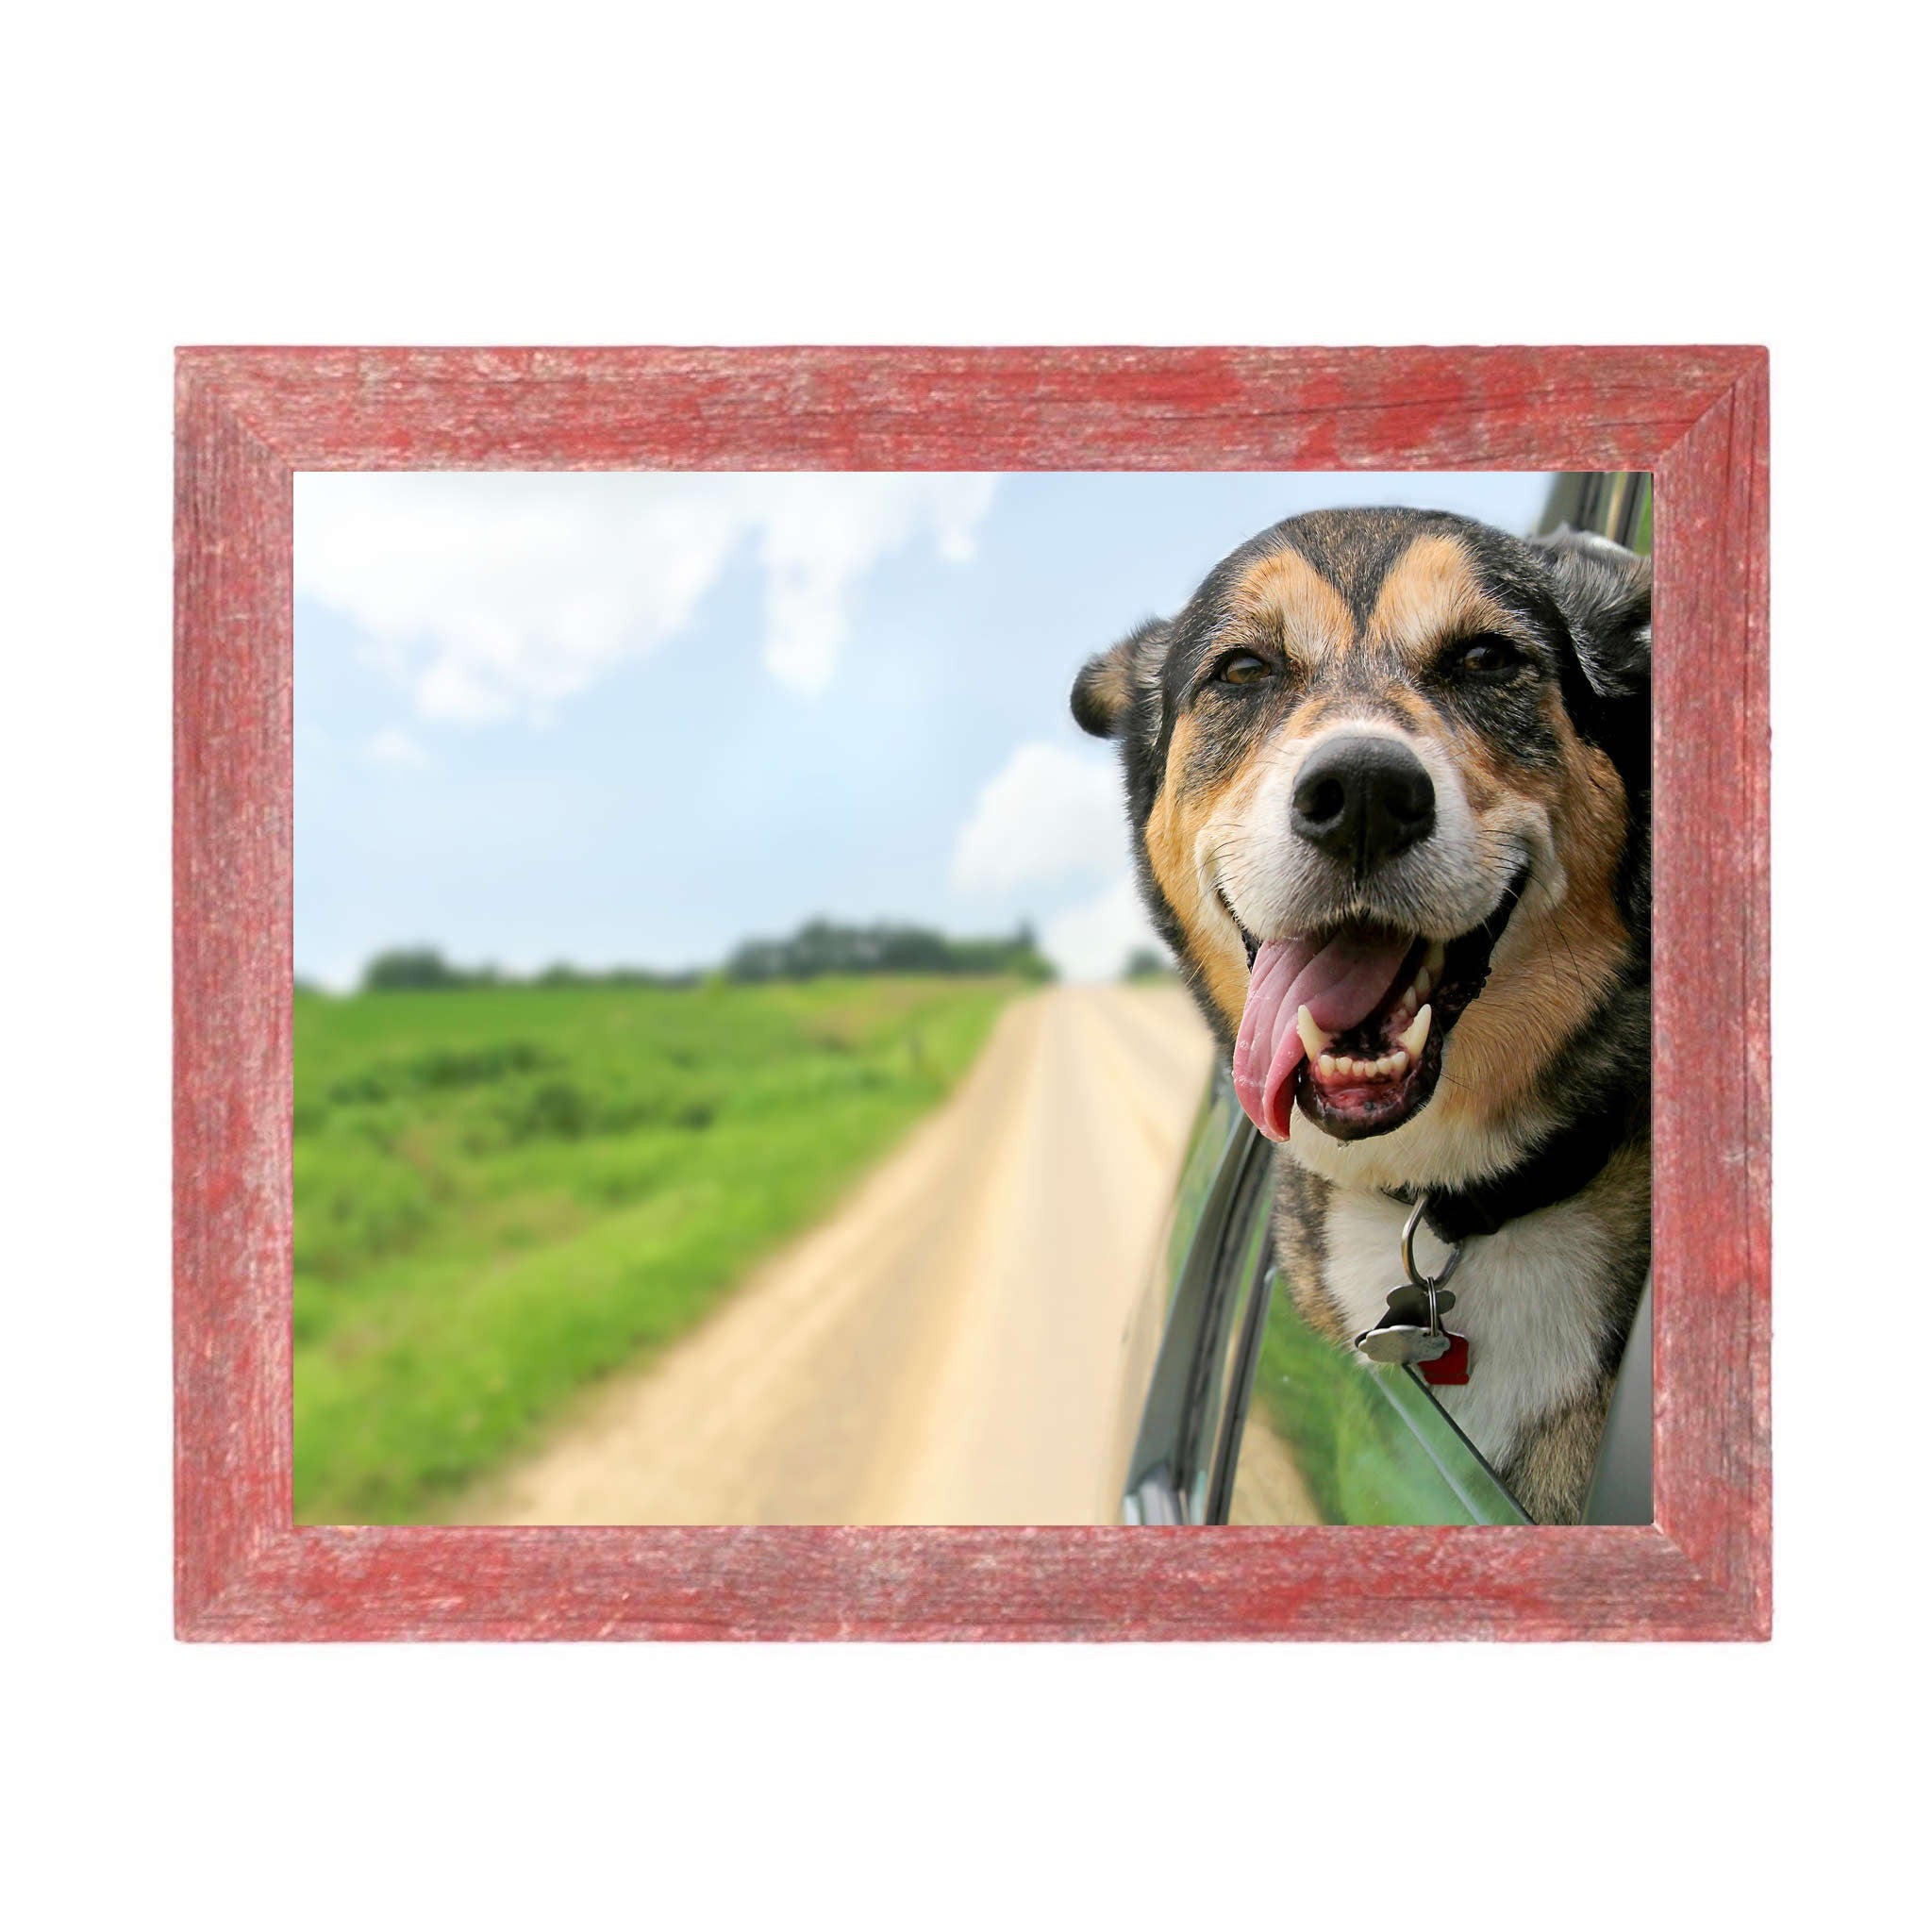 Rustic Farmhouse Red Wood Frame | 10